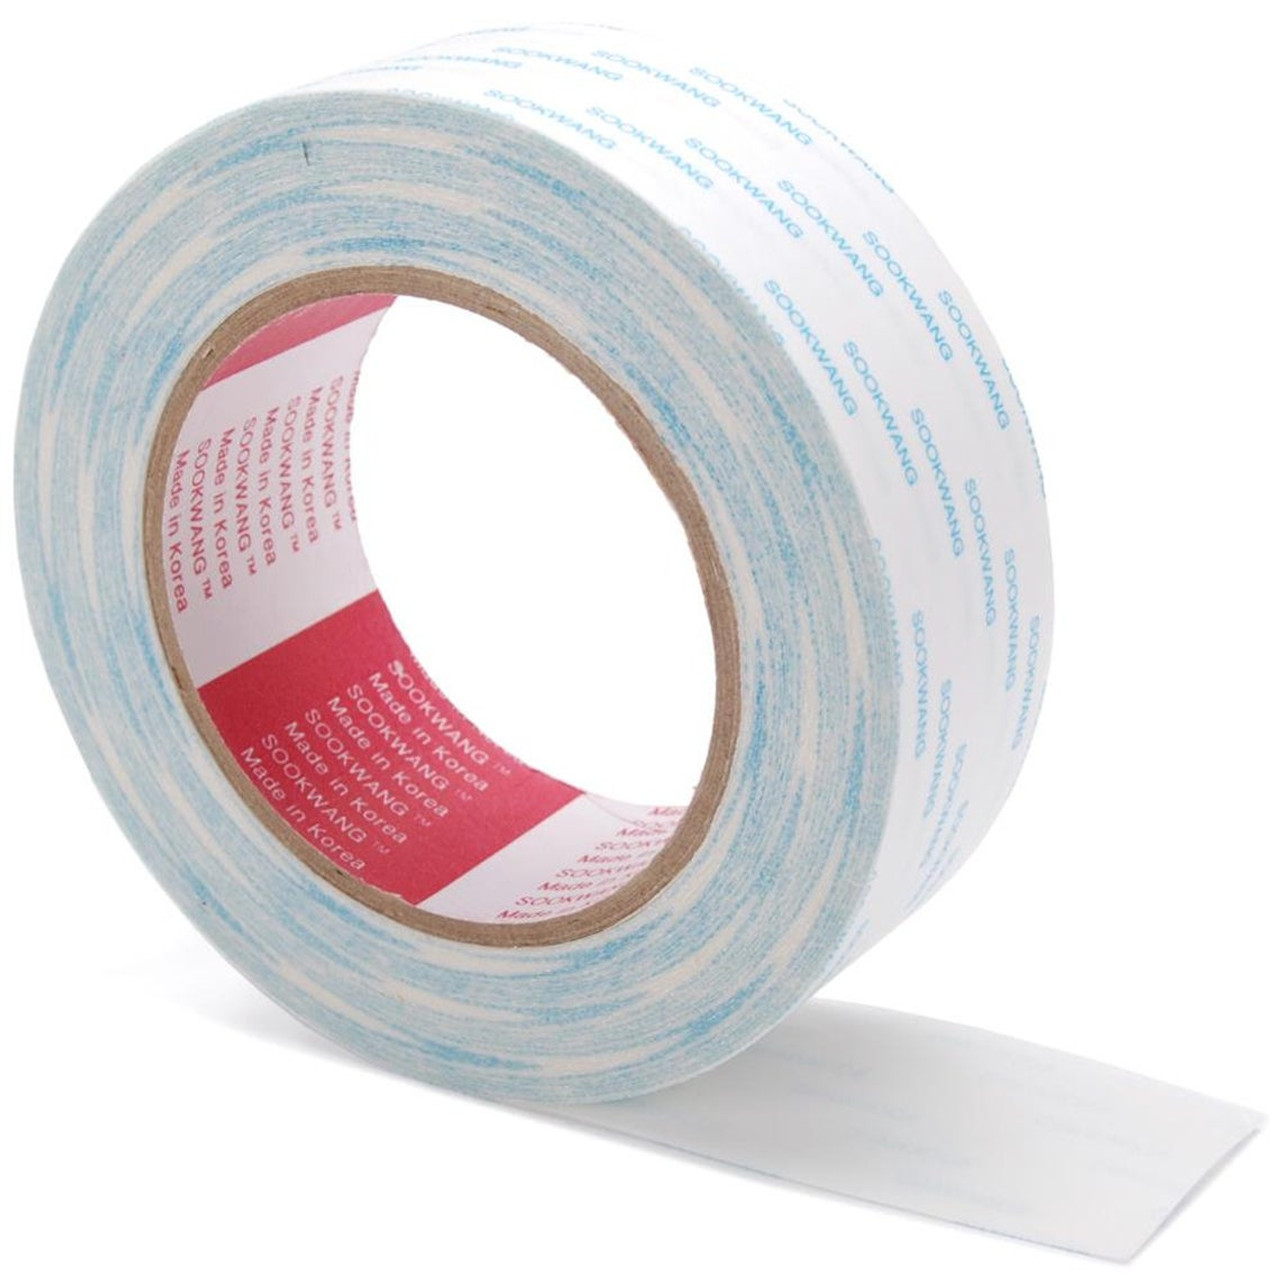 Scor-Tape - 1.5 - Perfect for Bible Journaling and Crafts